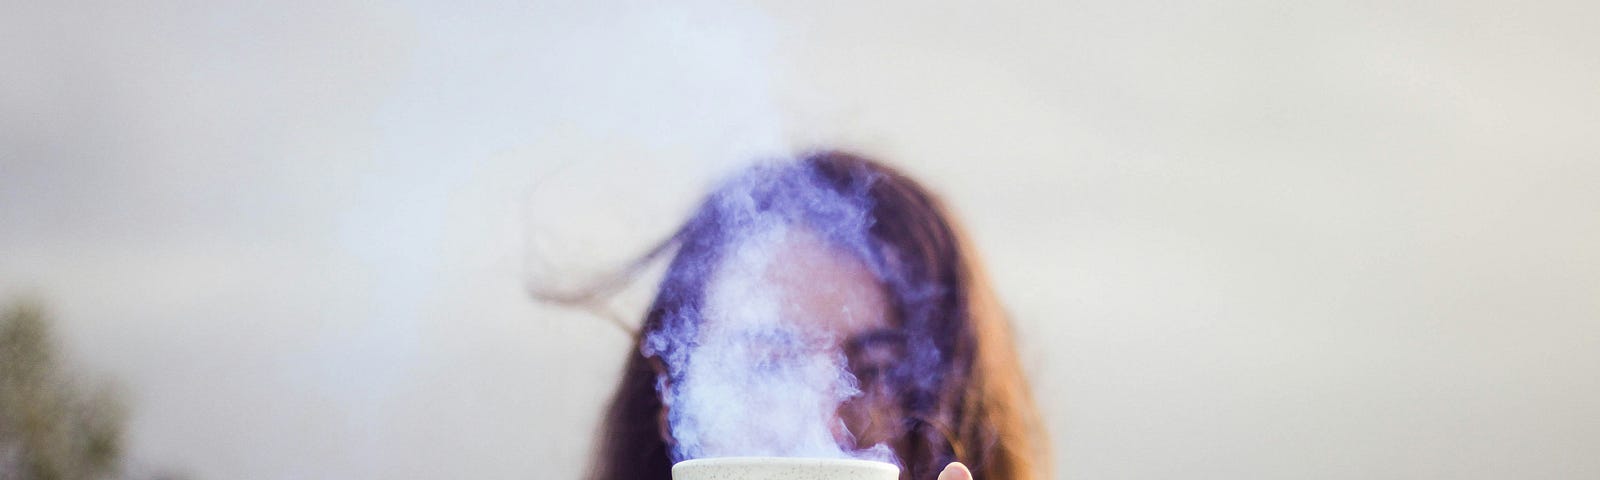 A person with long brown hair holds a cup of tea up to the camera, their face mysteriously obscured by the cup itself and the steam rising from it. The background is an out-of-focus rural scene.